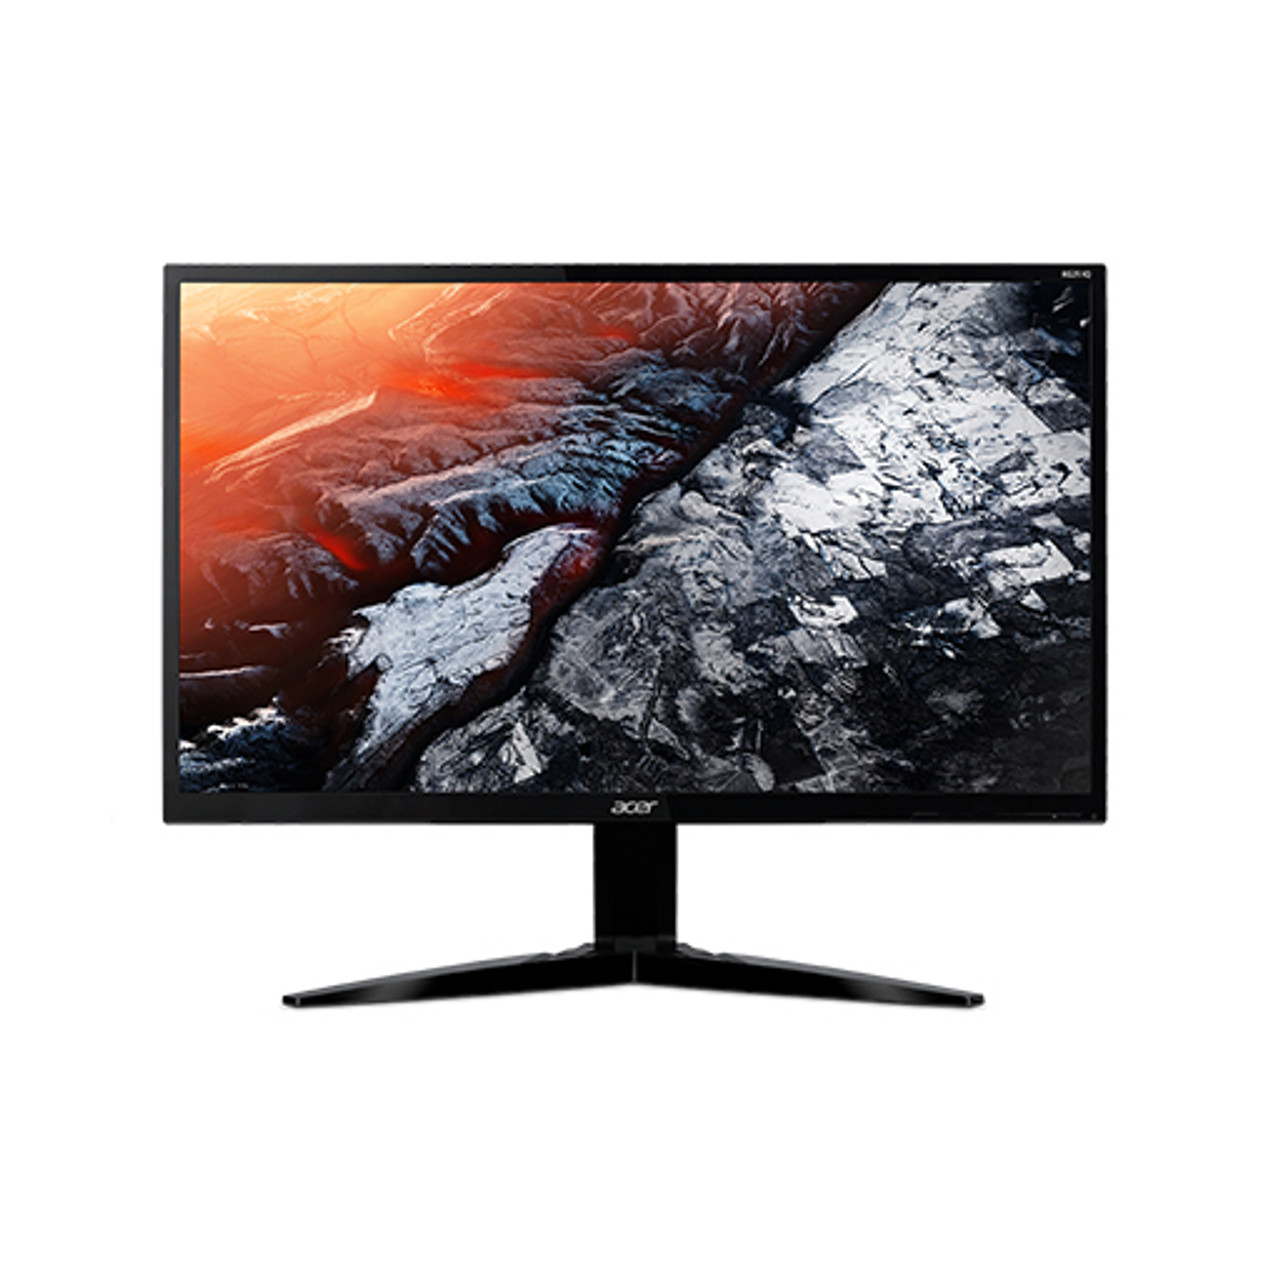 Acer KG1 KG271 Cbmidpx 27" Full HD TN+Film Black, Red Flat computer monitor